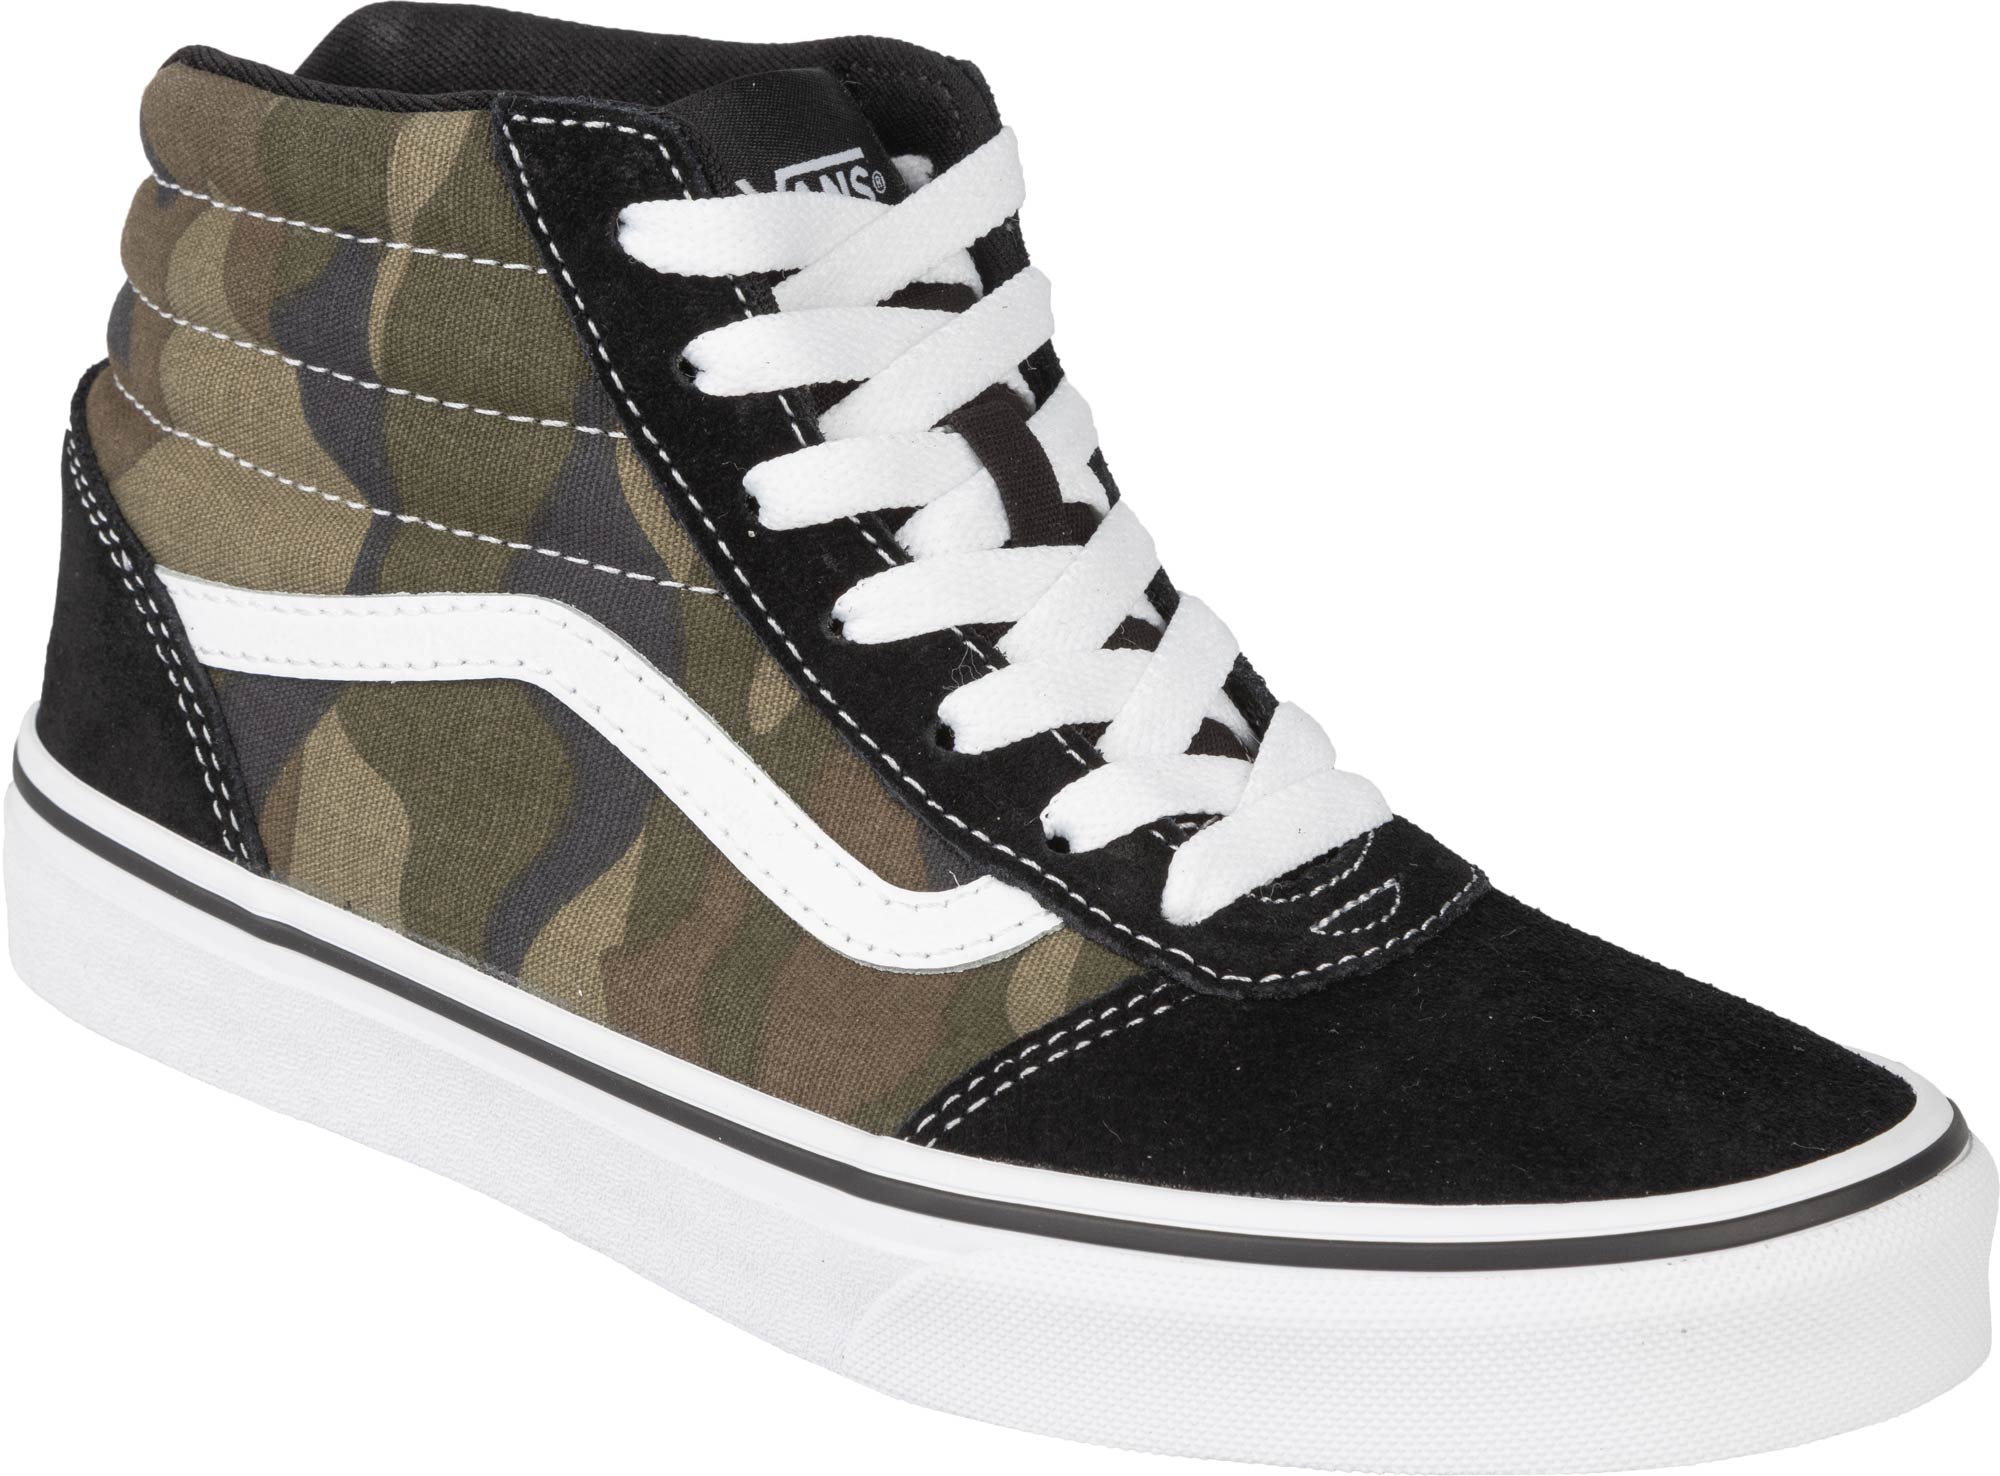 Boys’ ankle sneakers